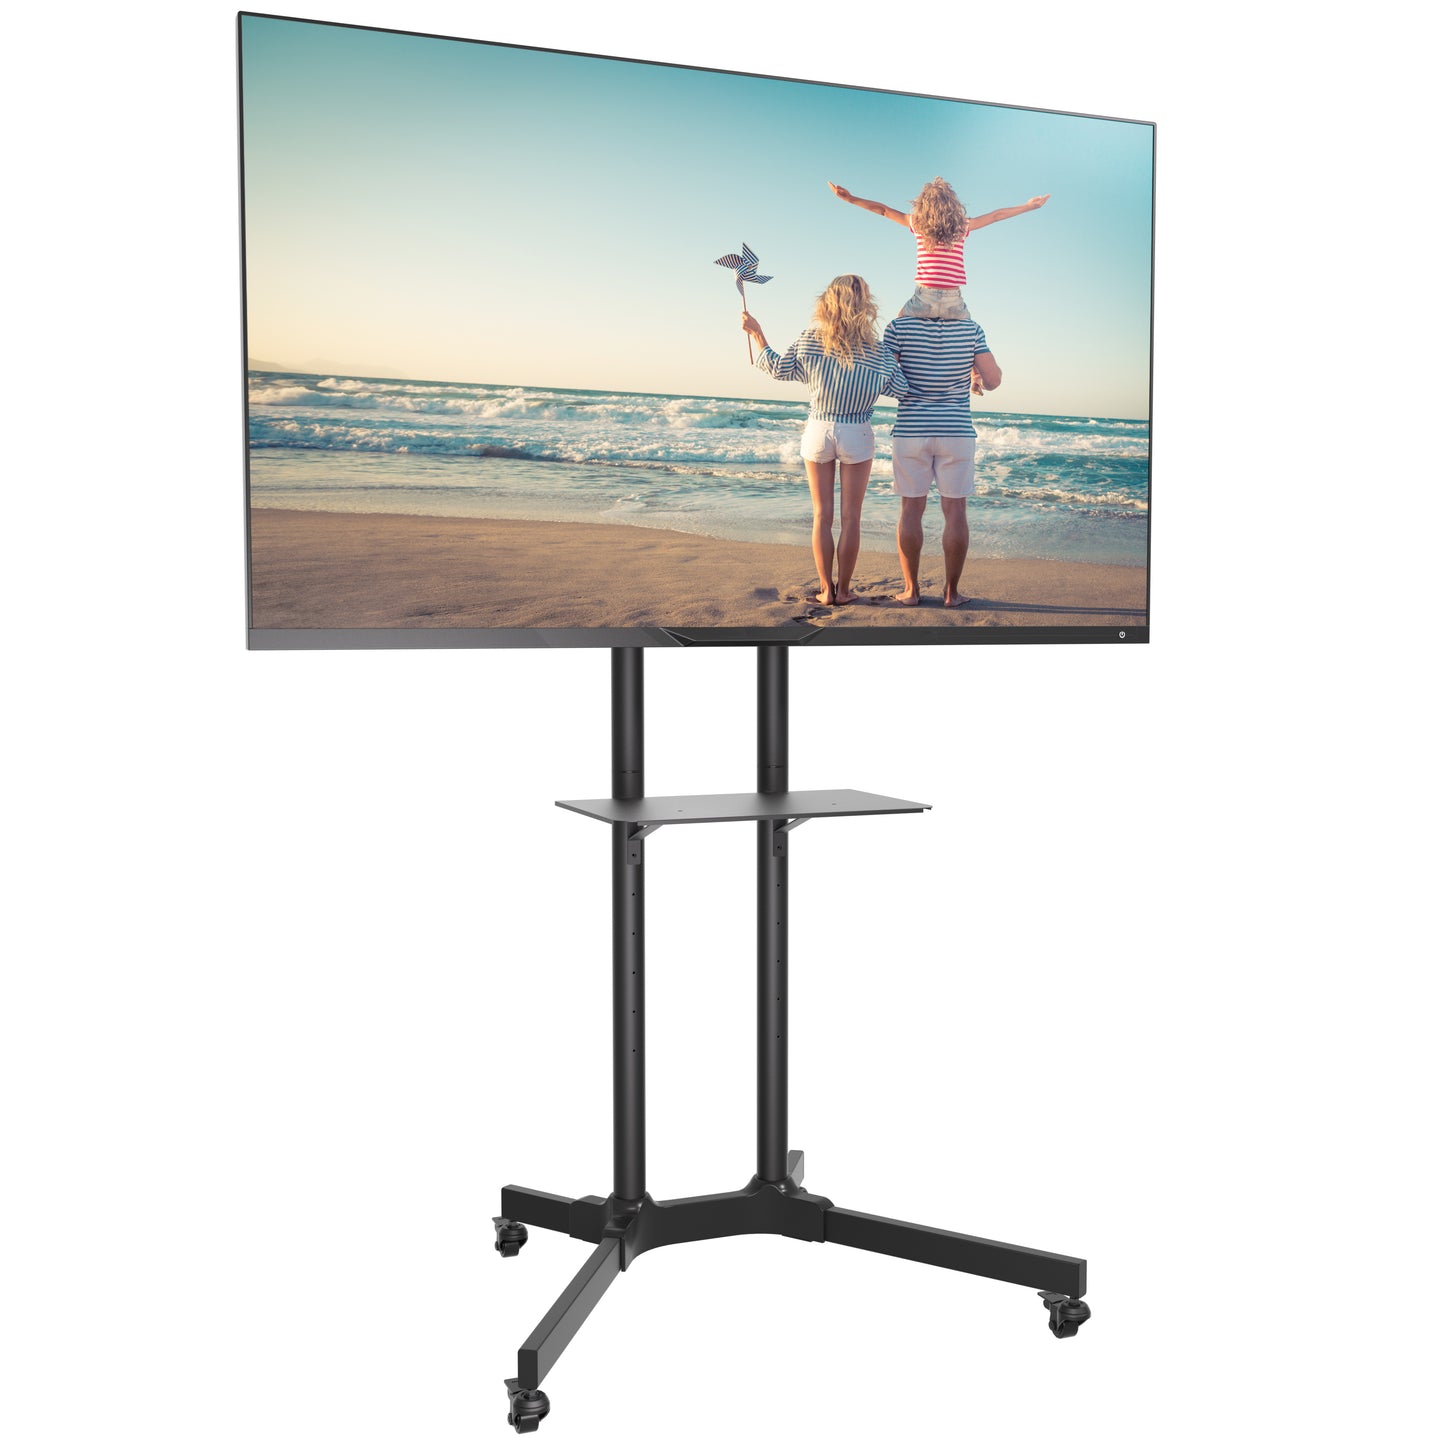 ProMount Rolling TV Stand with Mount and Adjustable Shelf for 32"-72" TVs, holds up to 110lbs (AFCS6402-02)